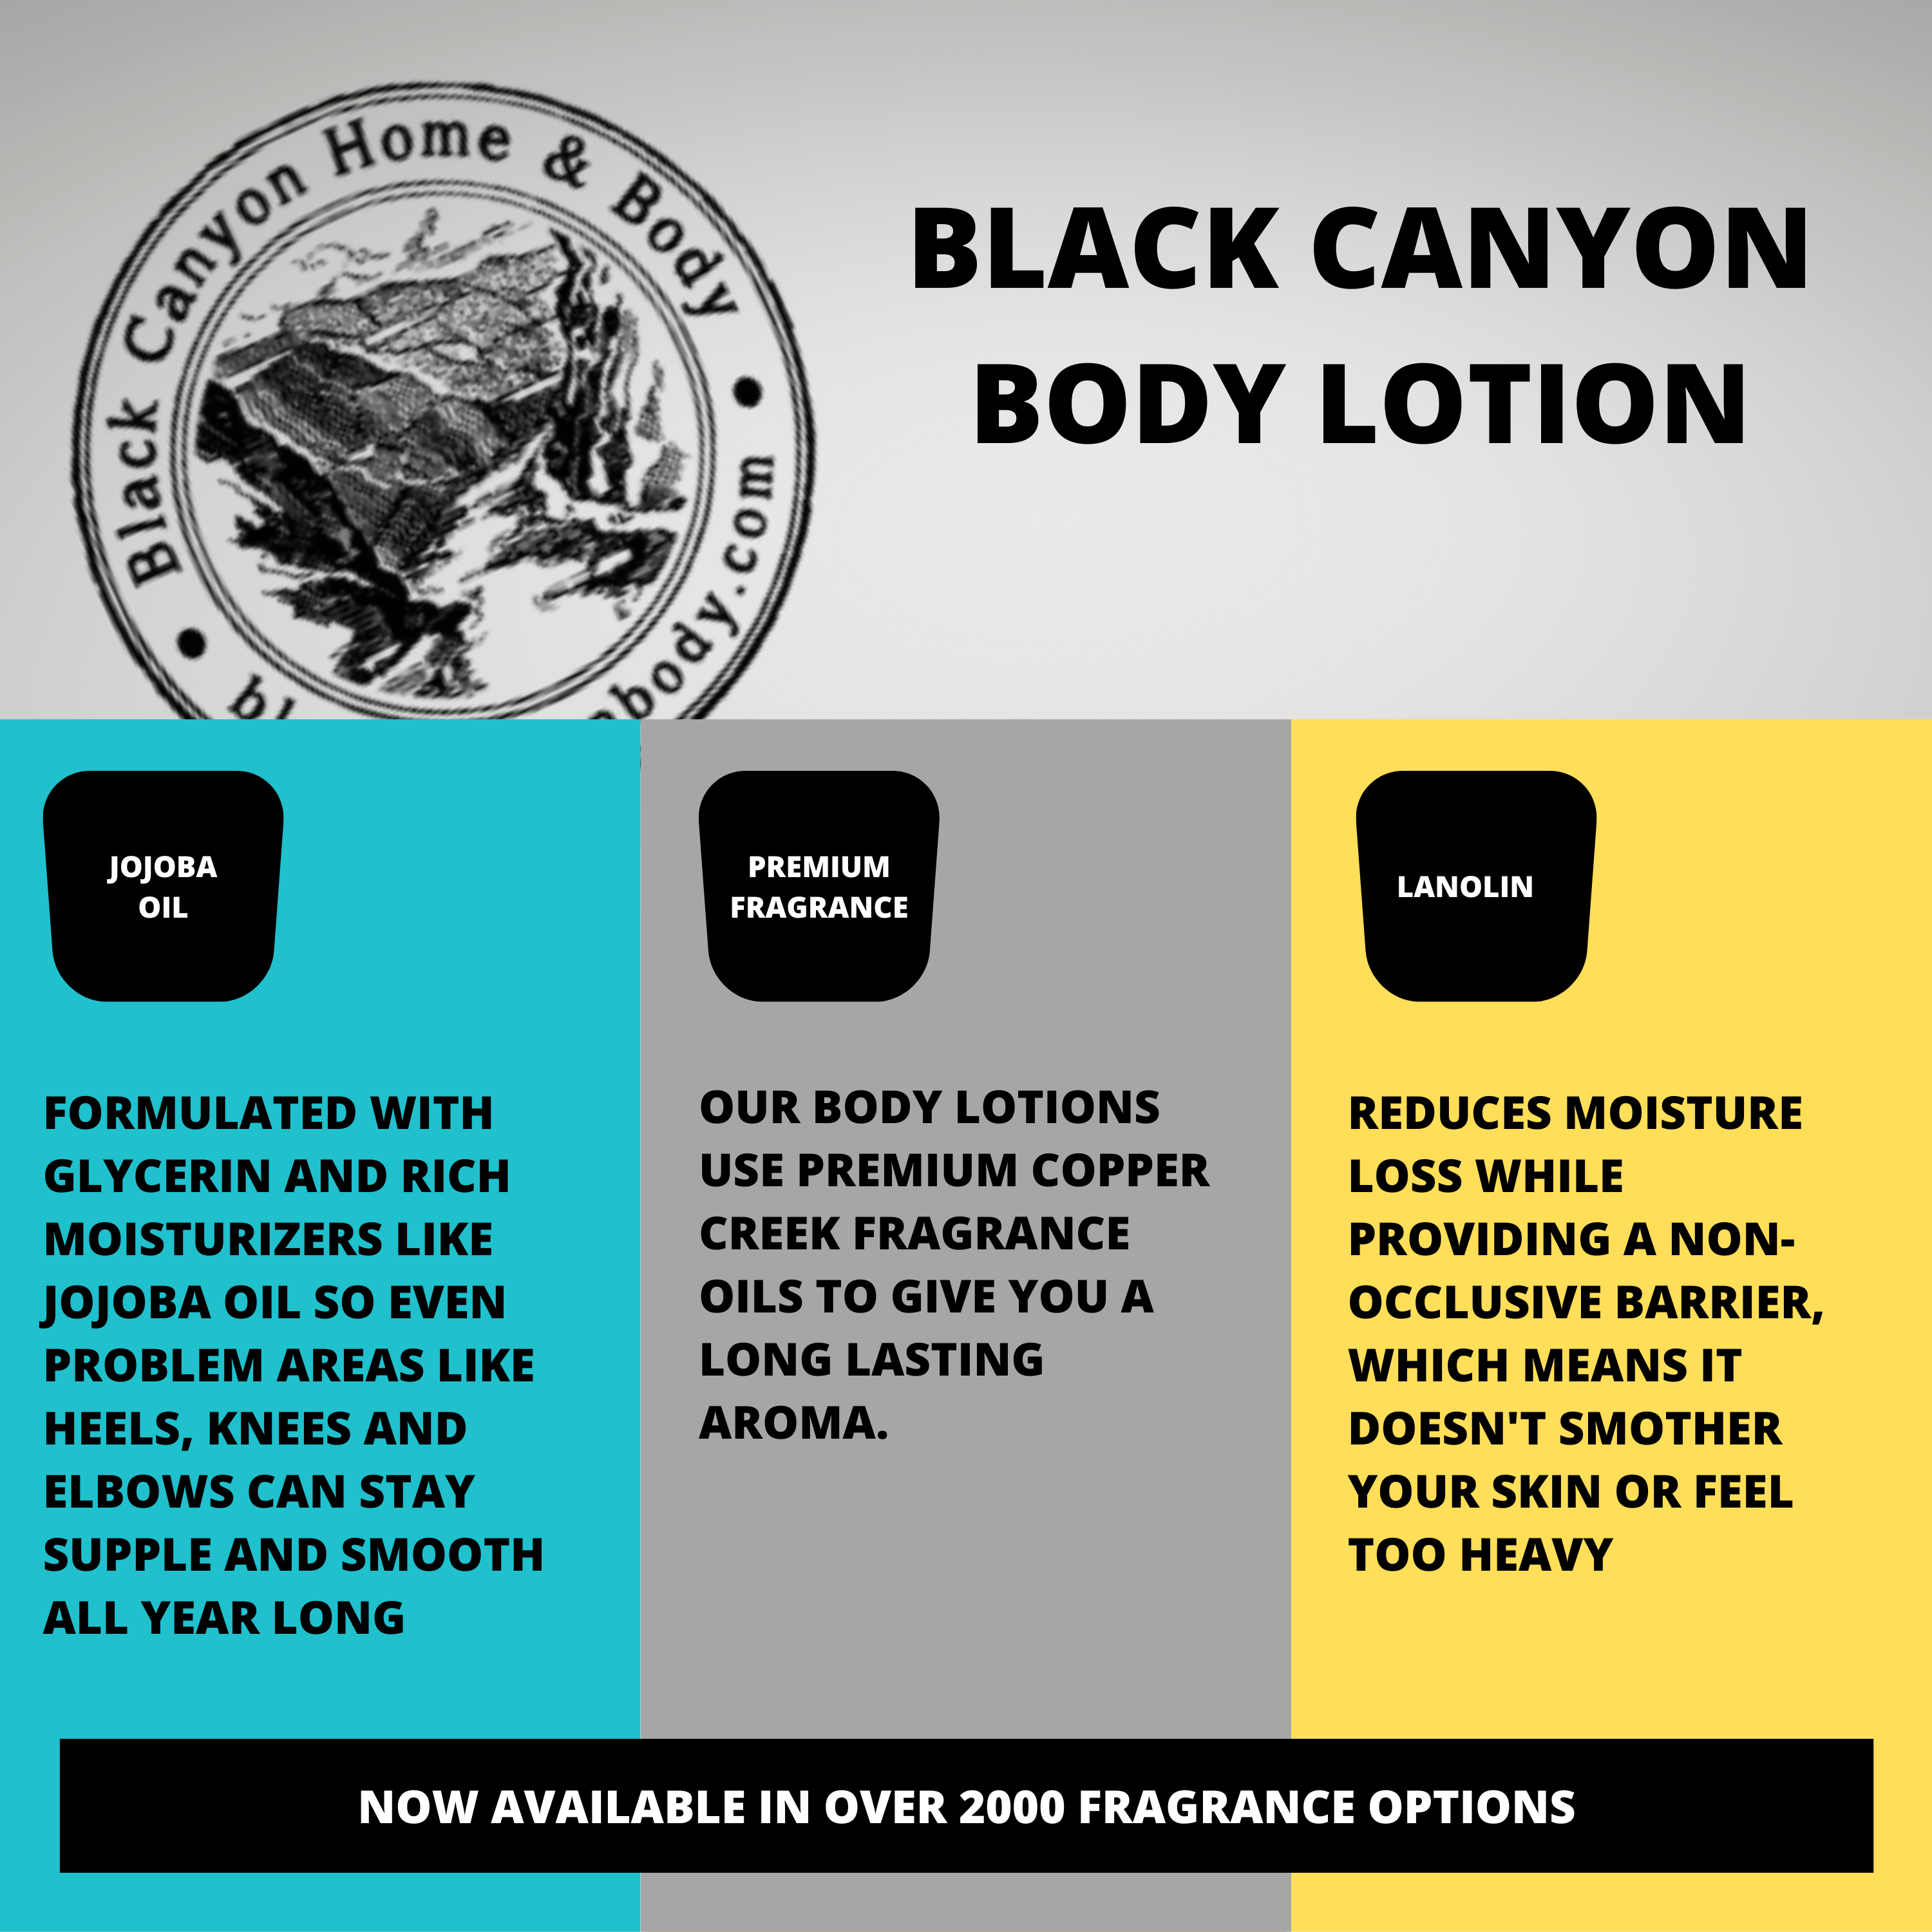 Black Canyon Simply Sinful Scented Luxury Body Lotion with Lanolin and Jojoba Oil